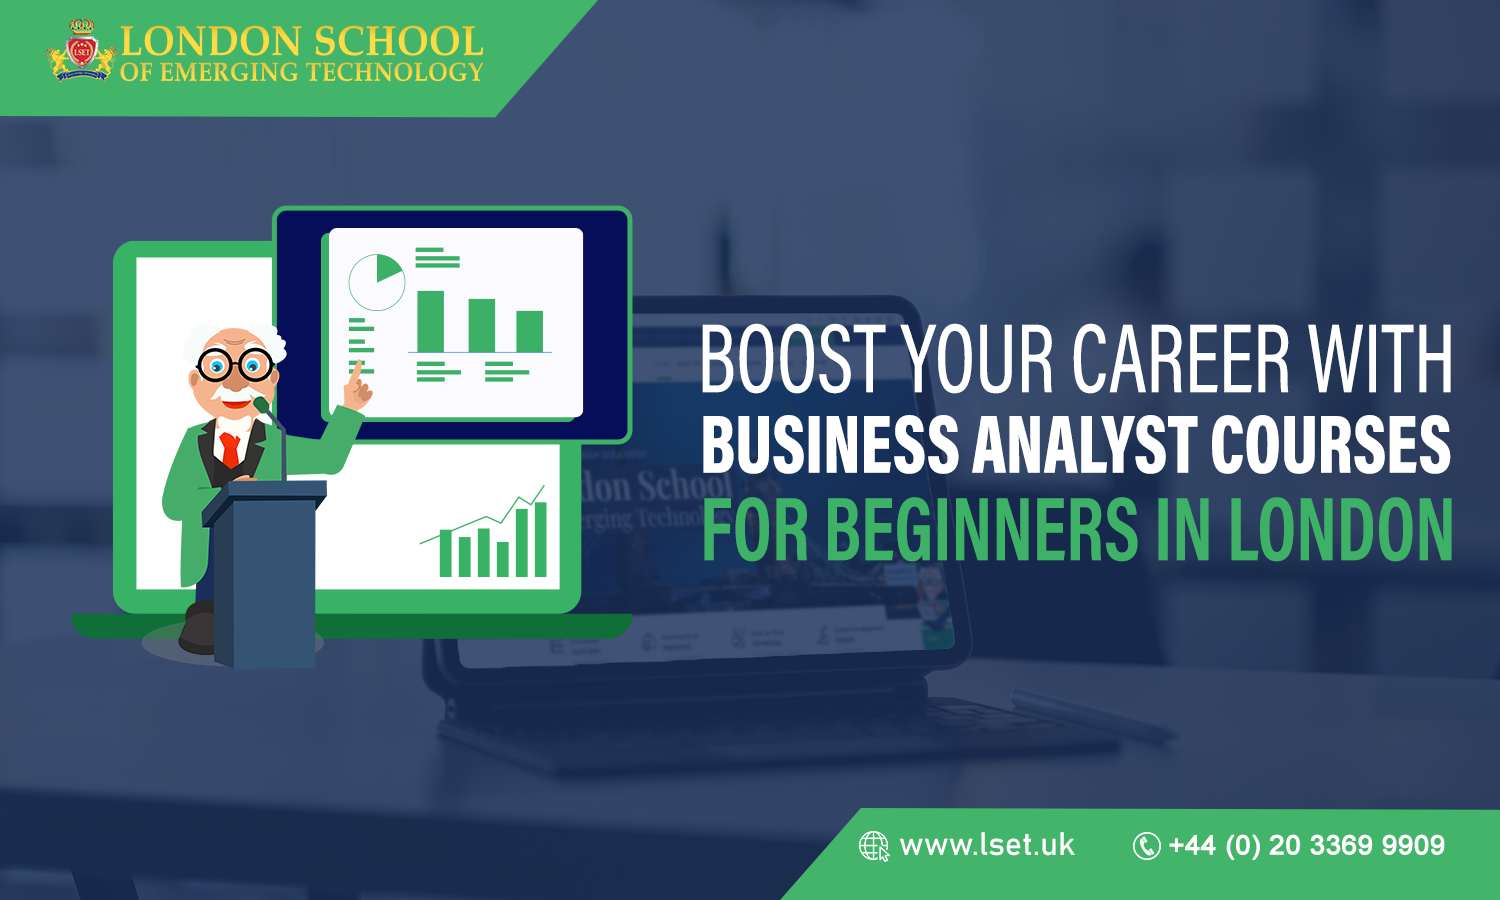 Boost Your Career with Business Analyst Courses for Beginners in London